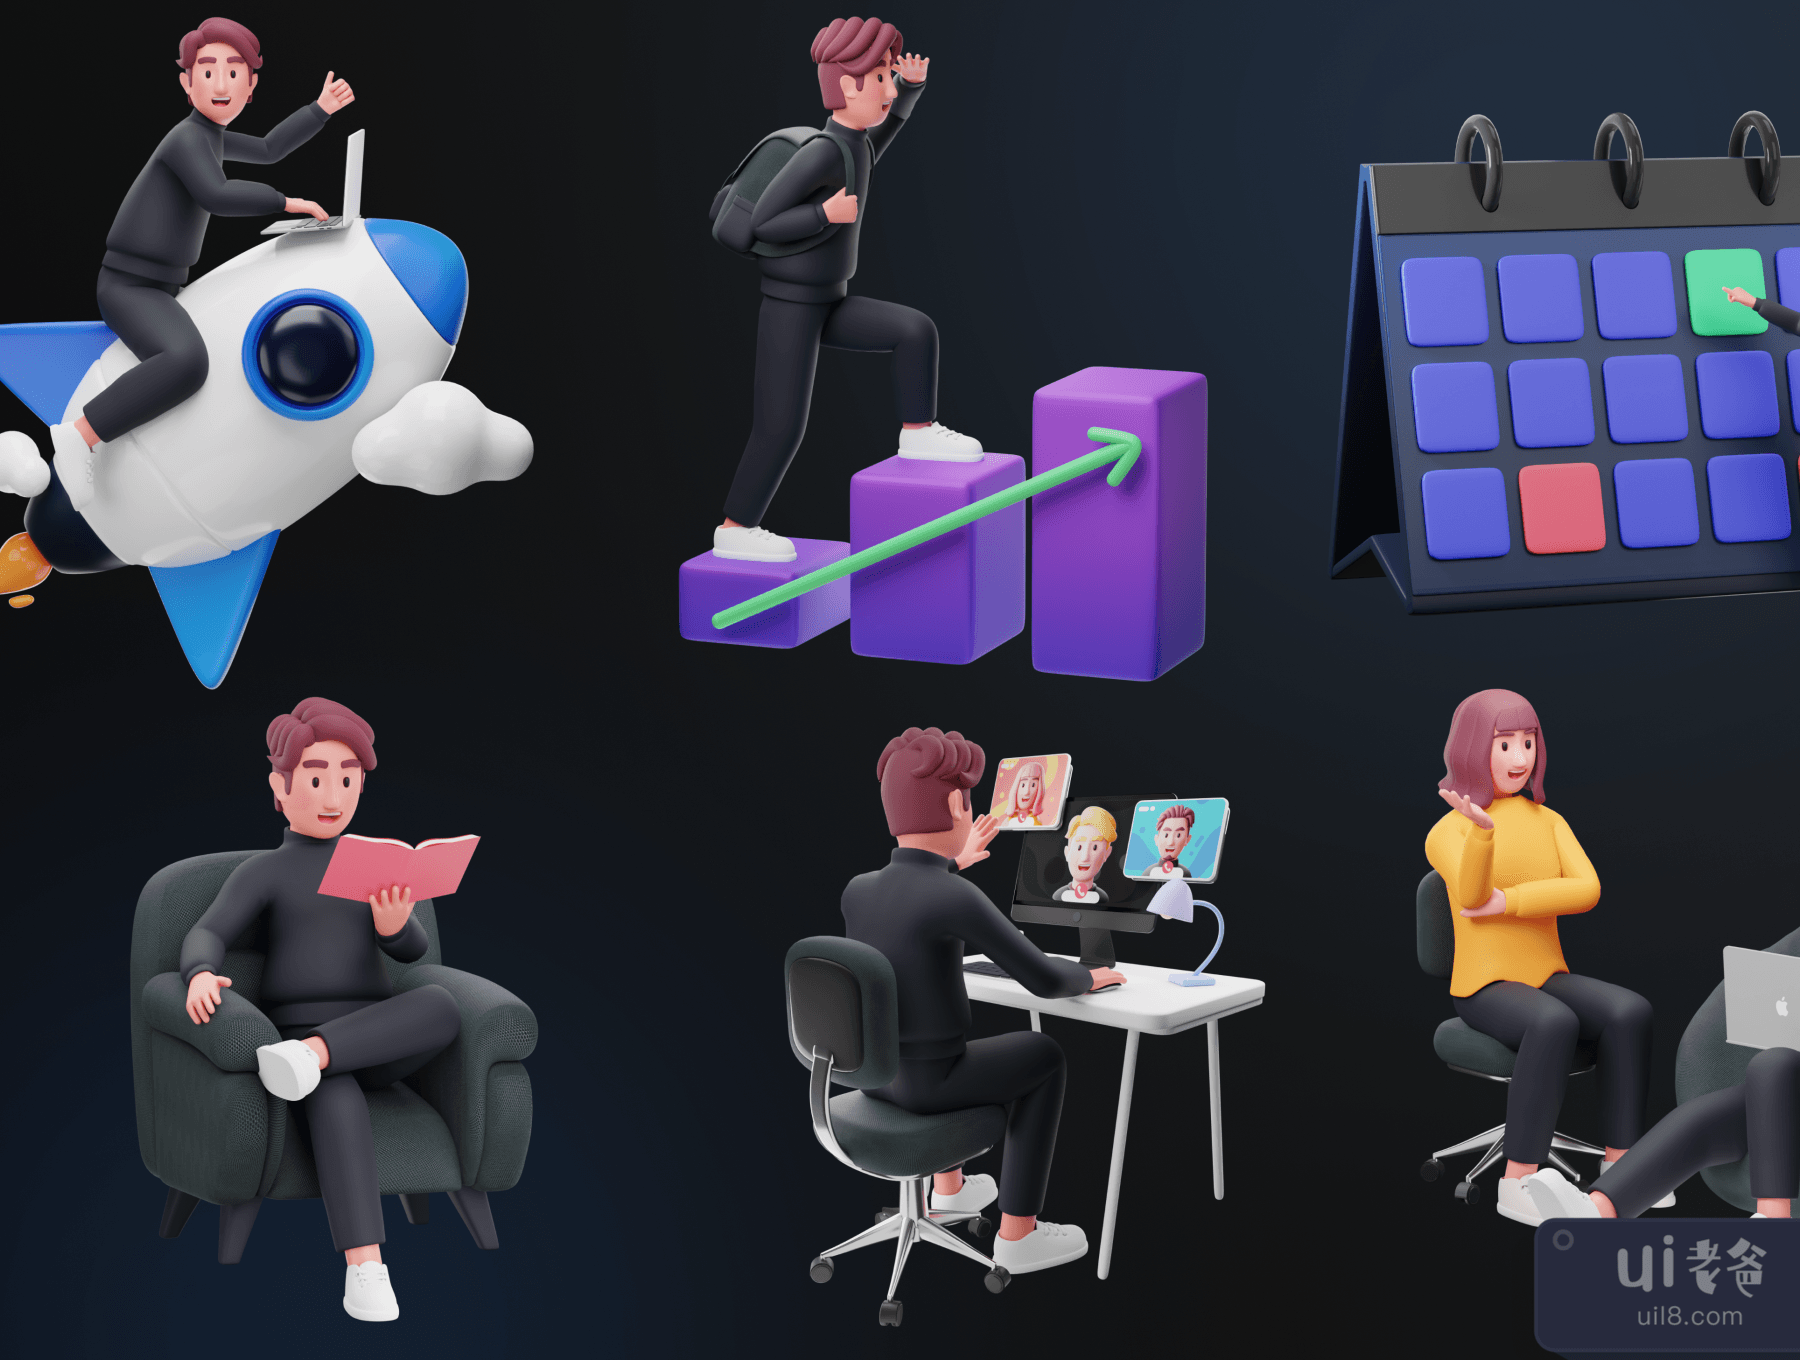 Workly - 创业公司_工作环境3D人物 (Workly - Startup _ Work Environment 3D Character)插图6